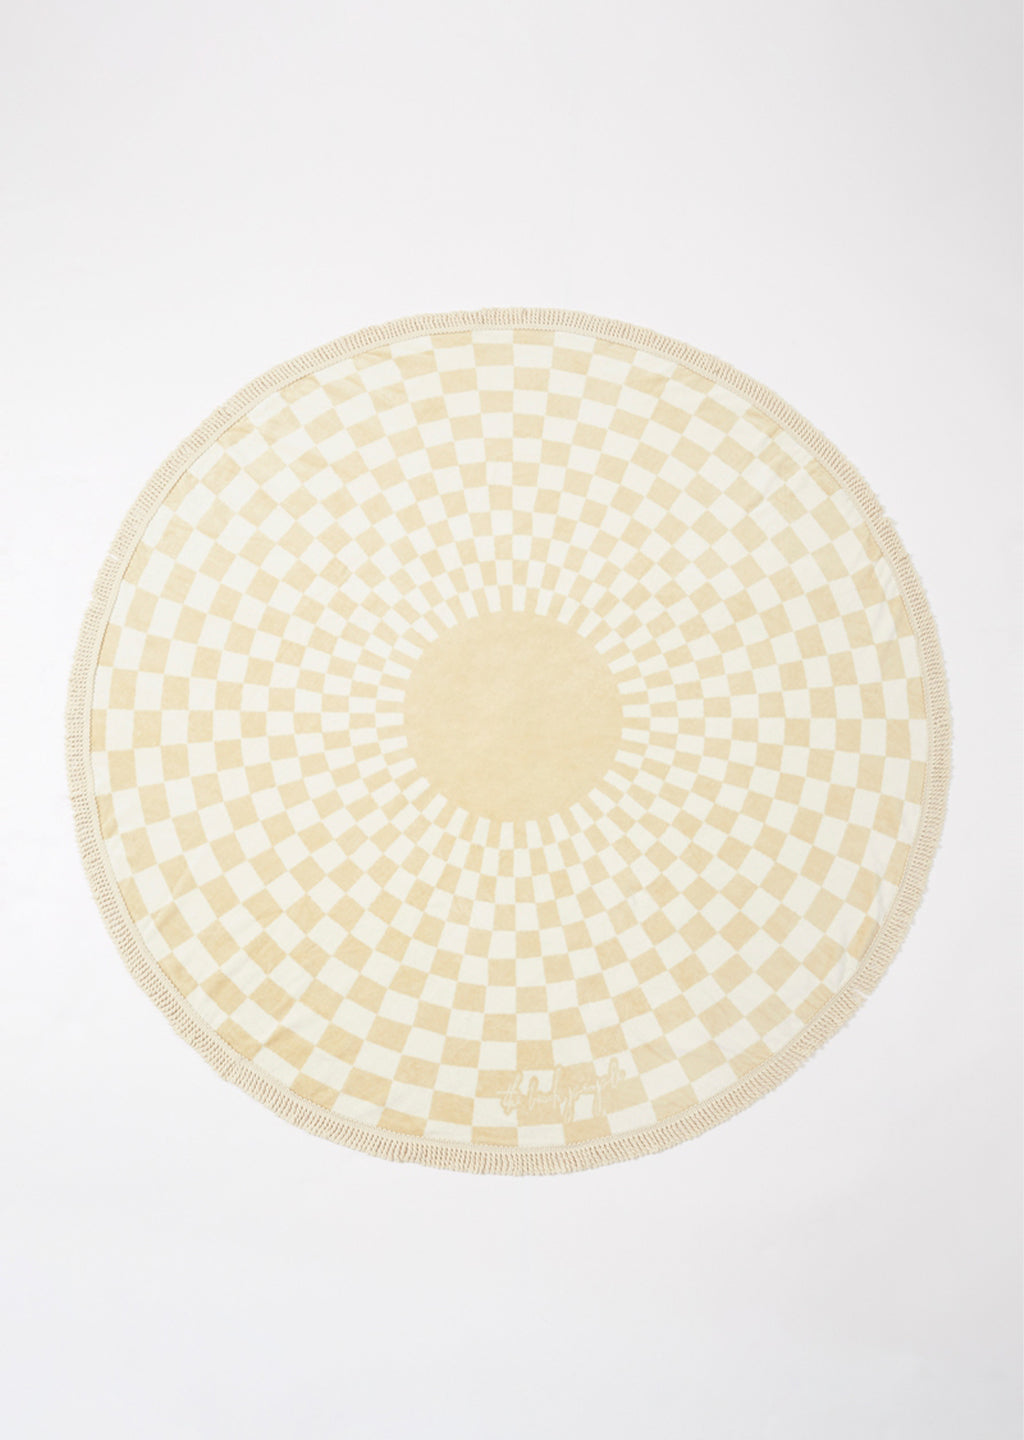 Oasis Round Towel - The Beach People 